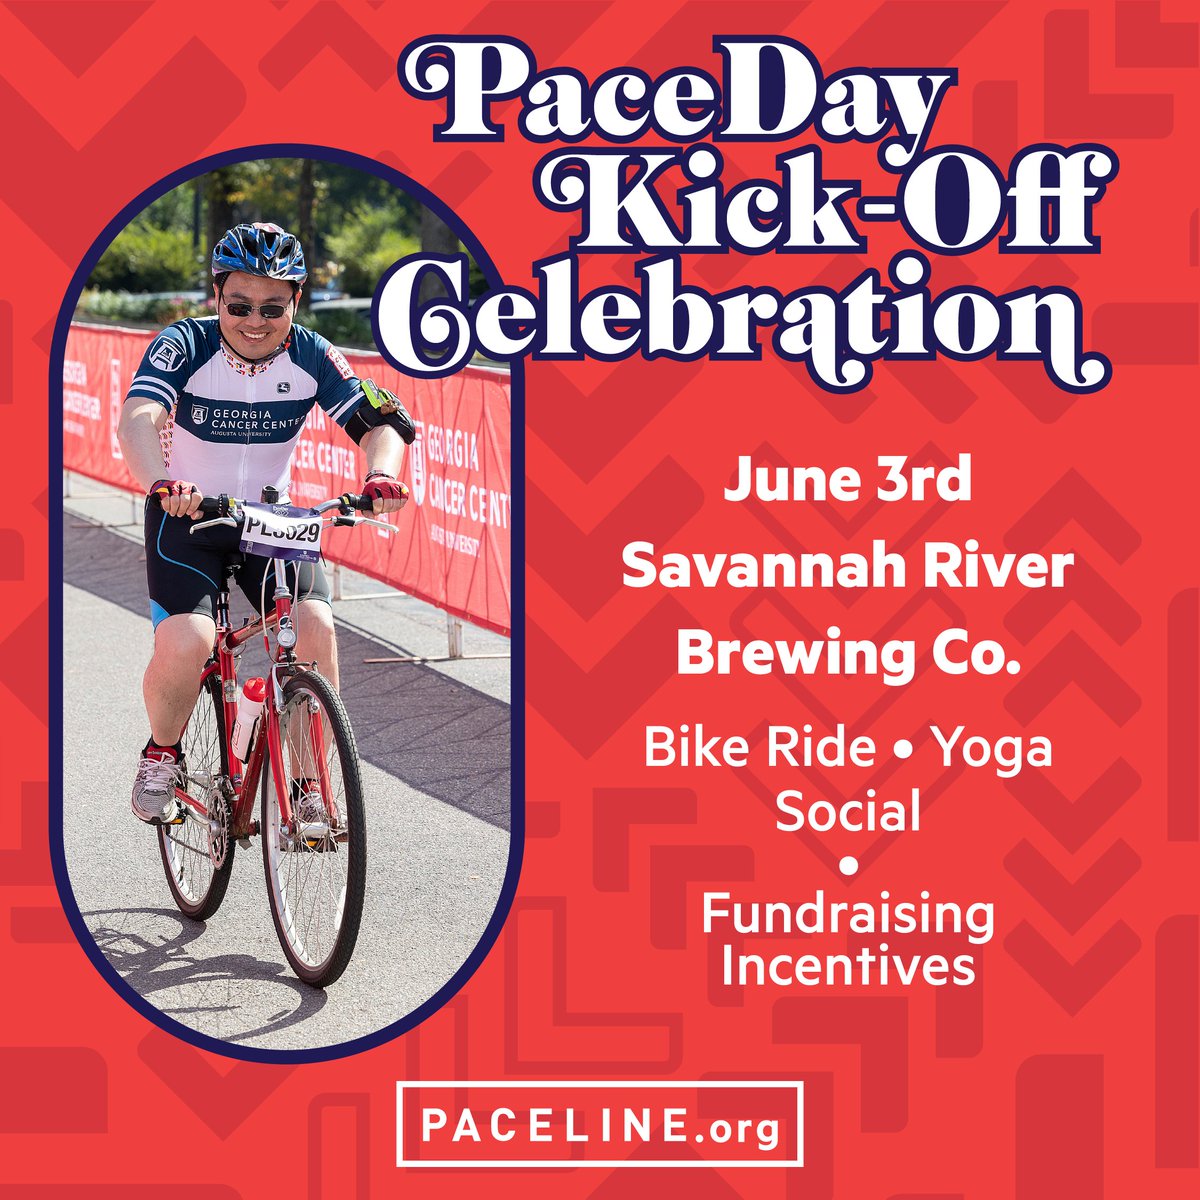 2 DAYS AWAY! Join us this Saturday, June 3rd, at Savannah River Brewing Company. 🚴Gates open at 8:30 AM with wheels down at 9:15 AM. 🧘‍♂️Yoga is at 10 AM. 🍻Brewery opens at 11 AM for socializing, beers, and food from Fuse Mobile. #jointhepaceline #curecancerfaster #community